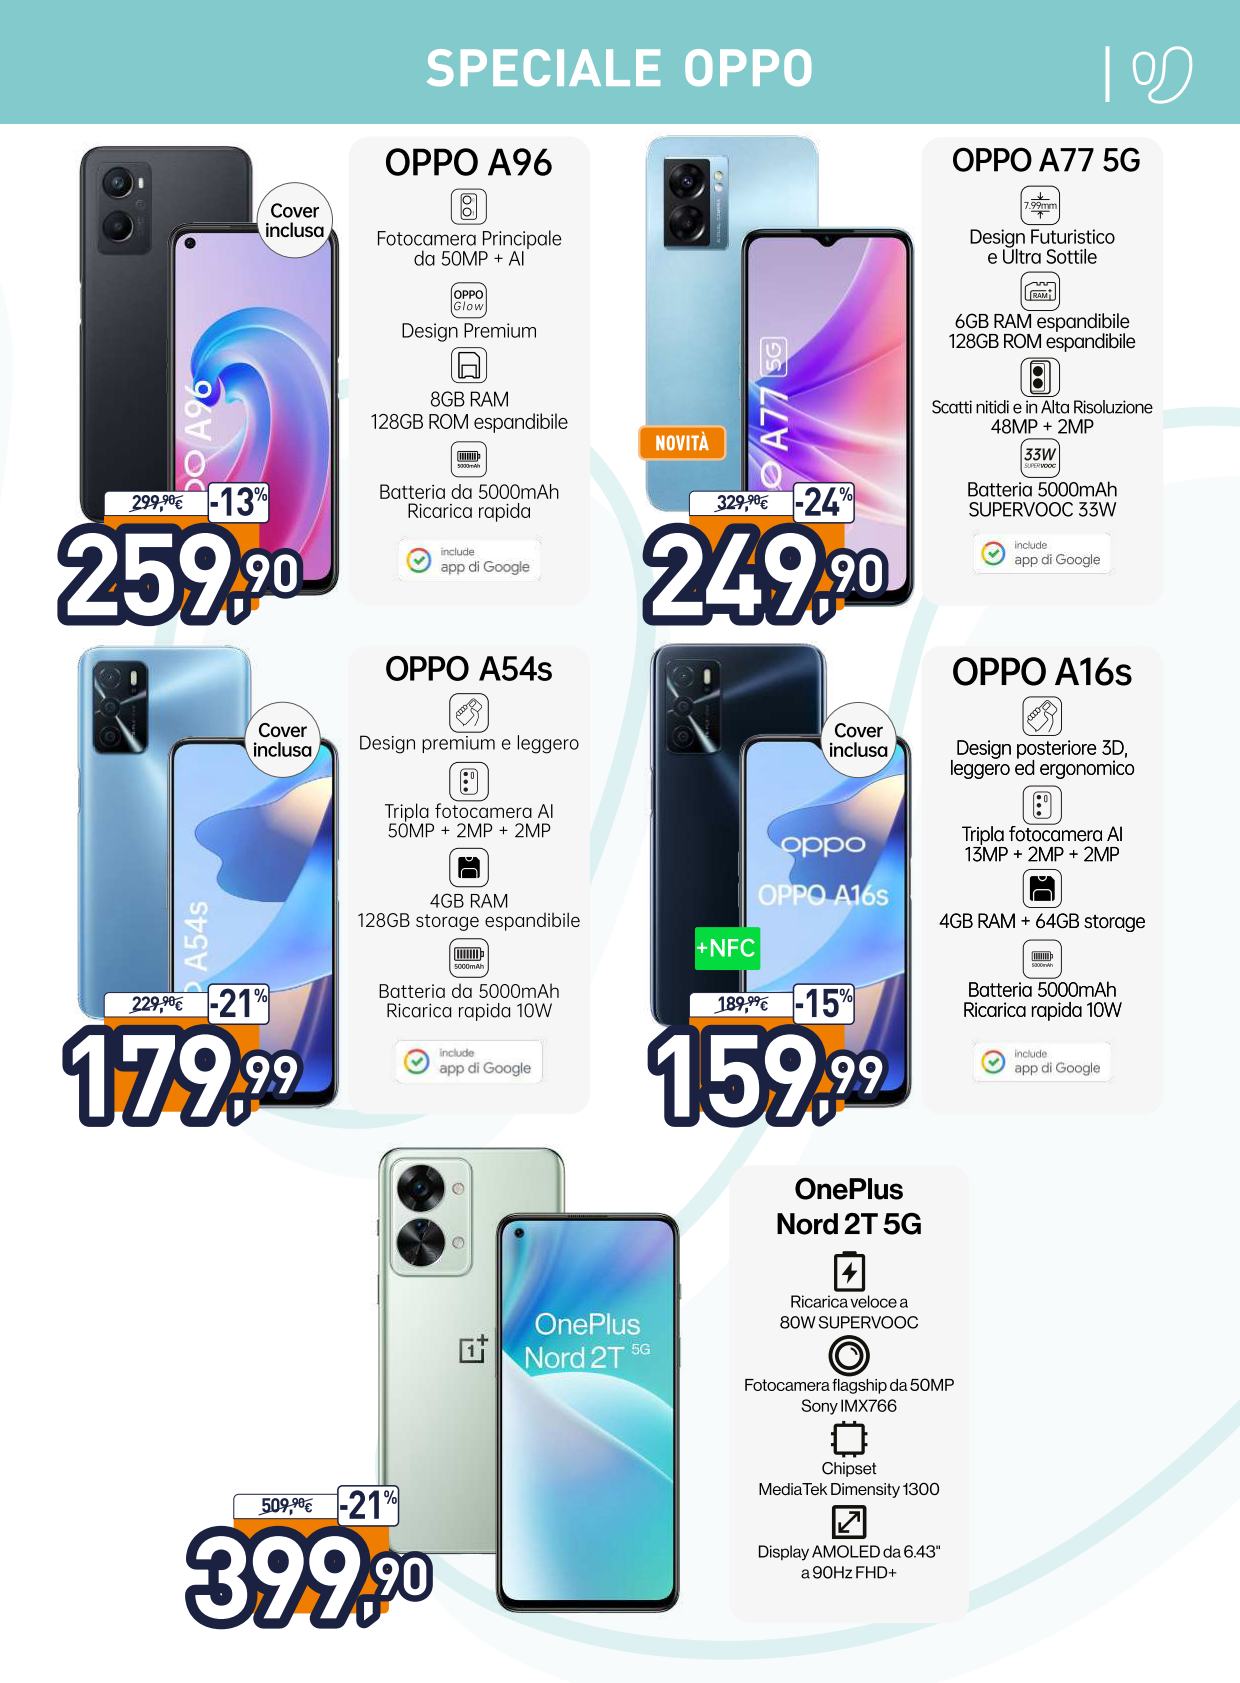 Speciale Oppo